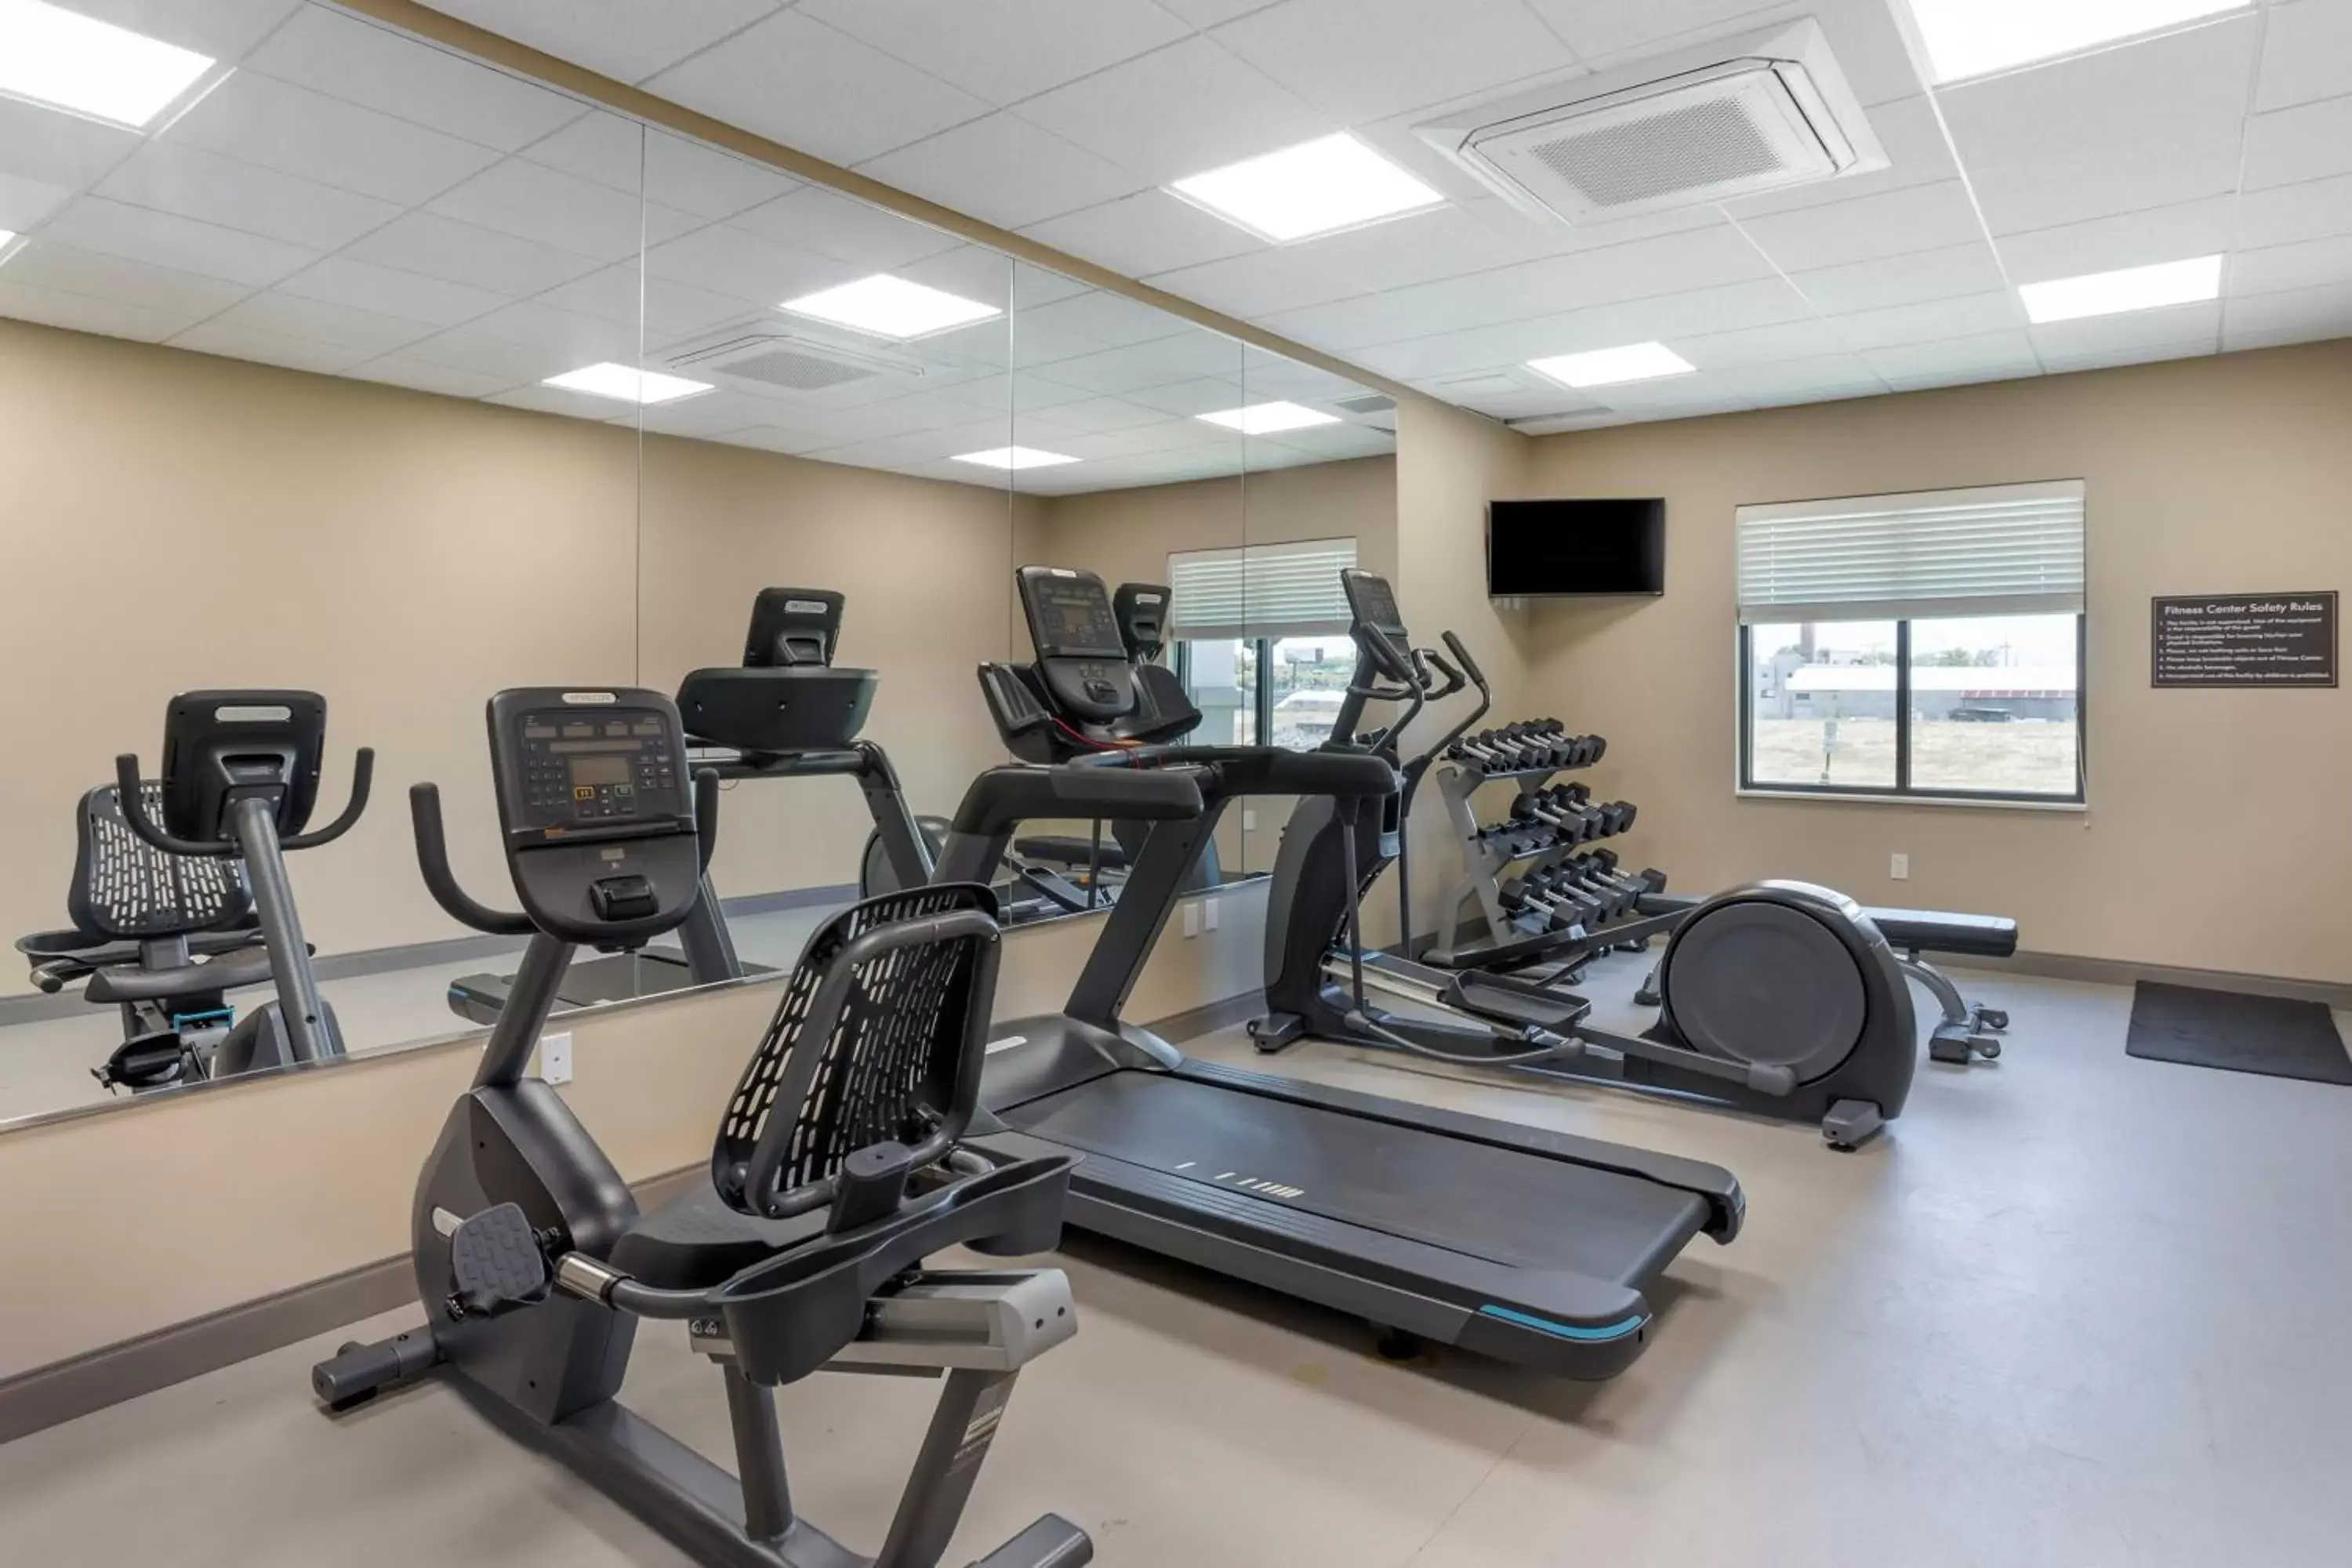 Fitness centre/facilities, Fitness Center/Facilities in MainStay Suites North - Central York